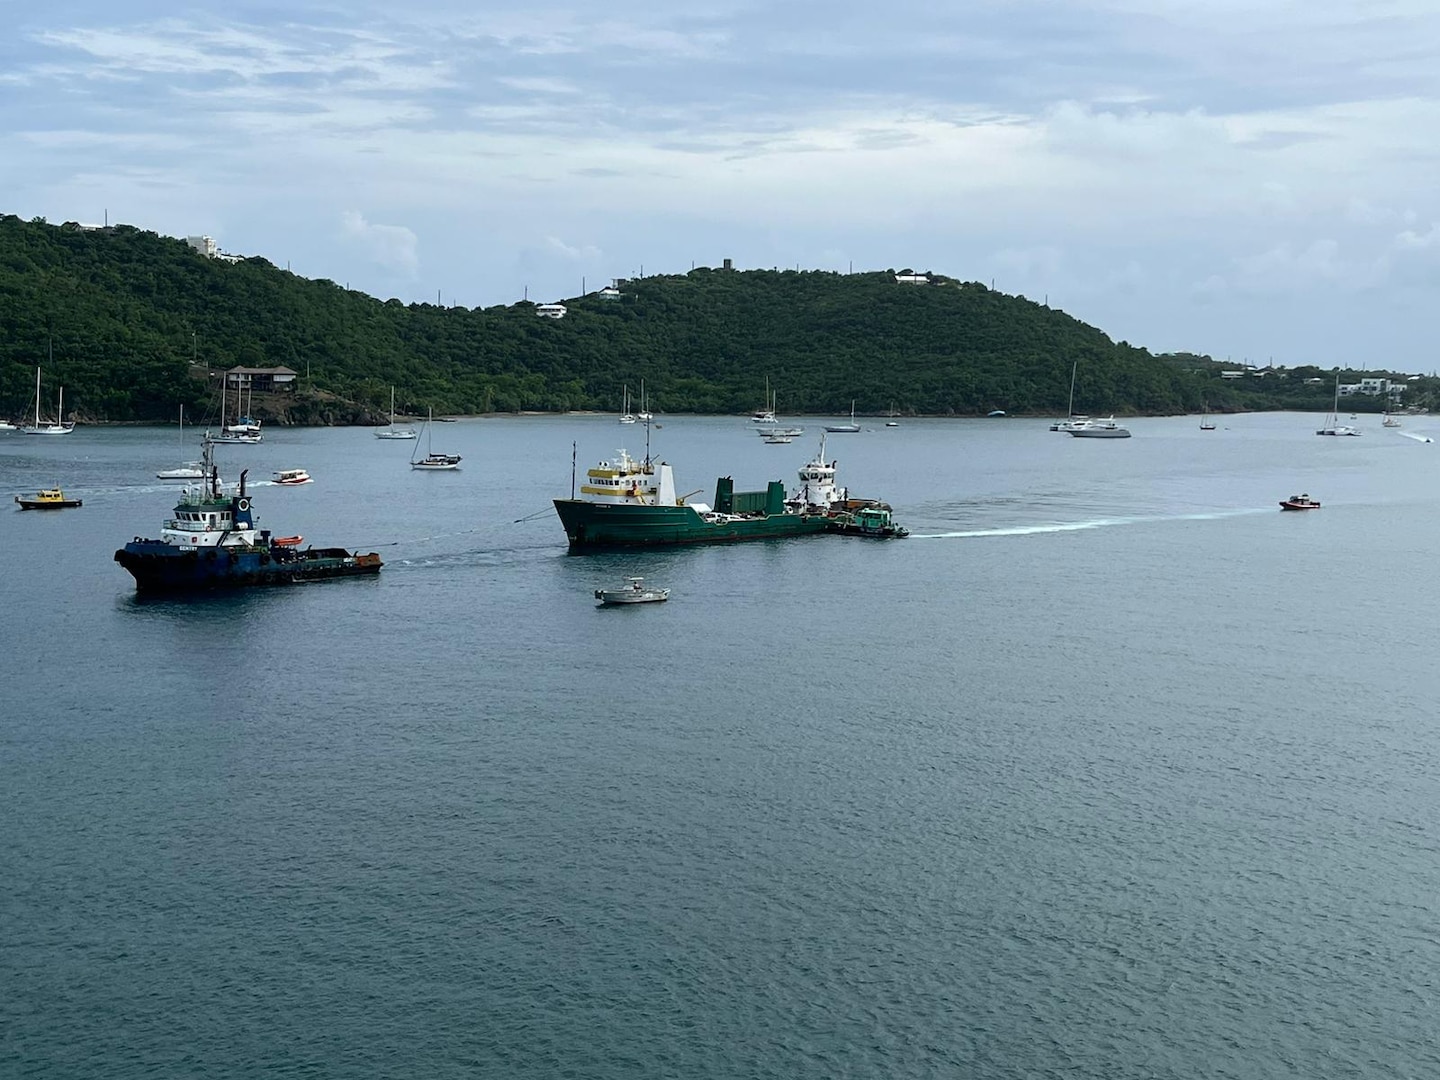 DonJon-SMIT, Inc. salvage crews and Playland Marine LLC pollution removal crews working during the refloat and towing of the cargo vessel Bonnie G to safe harbor at the Sandfill dock in St. Thomas, U.S. Virgin Islands, Oct. 30, 2023.  The Bonnie G Response Incident Command comprised of Coast Guard, federal and local agencies as well as the responsible party oversaw the operation. The Bonnie G cargo vessel ran aground half a mile south of the Cyril E. King airport in St. Thomas, Oct. 4, 2023.  (Bonnie G Response photo)